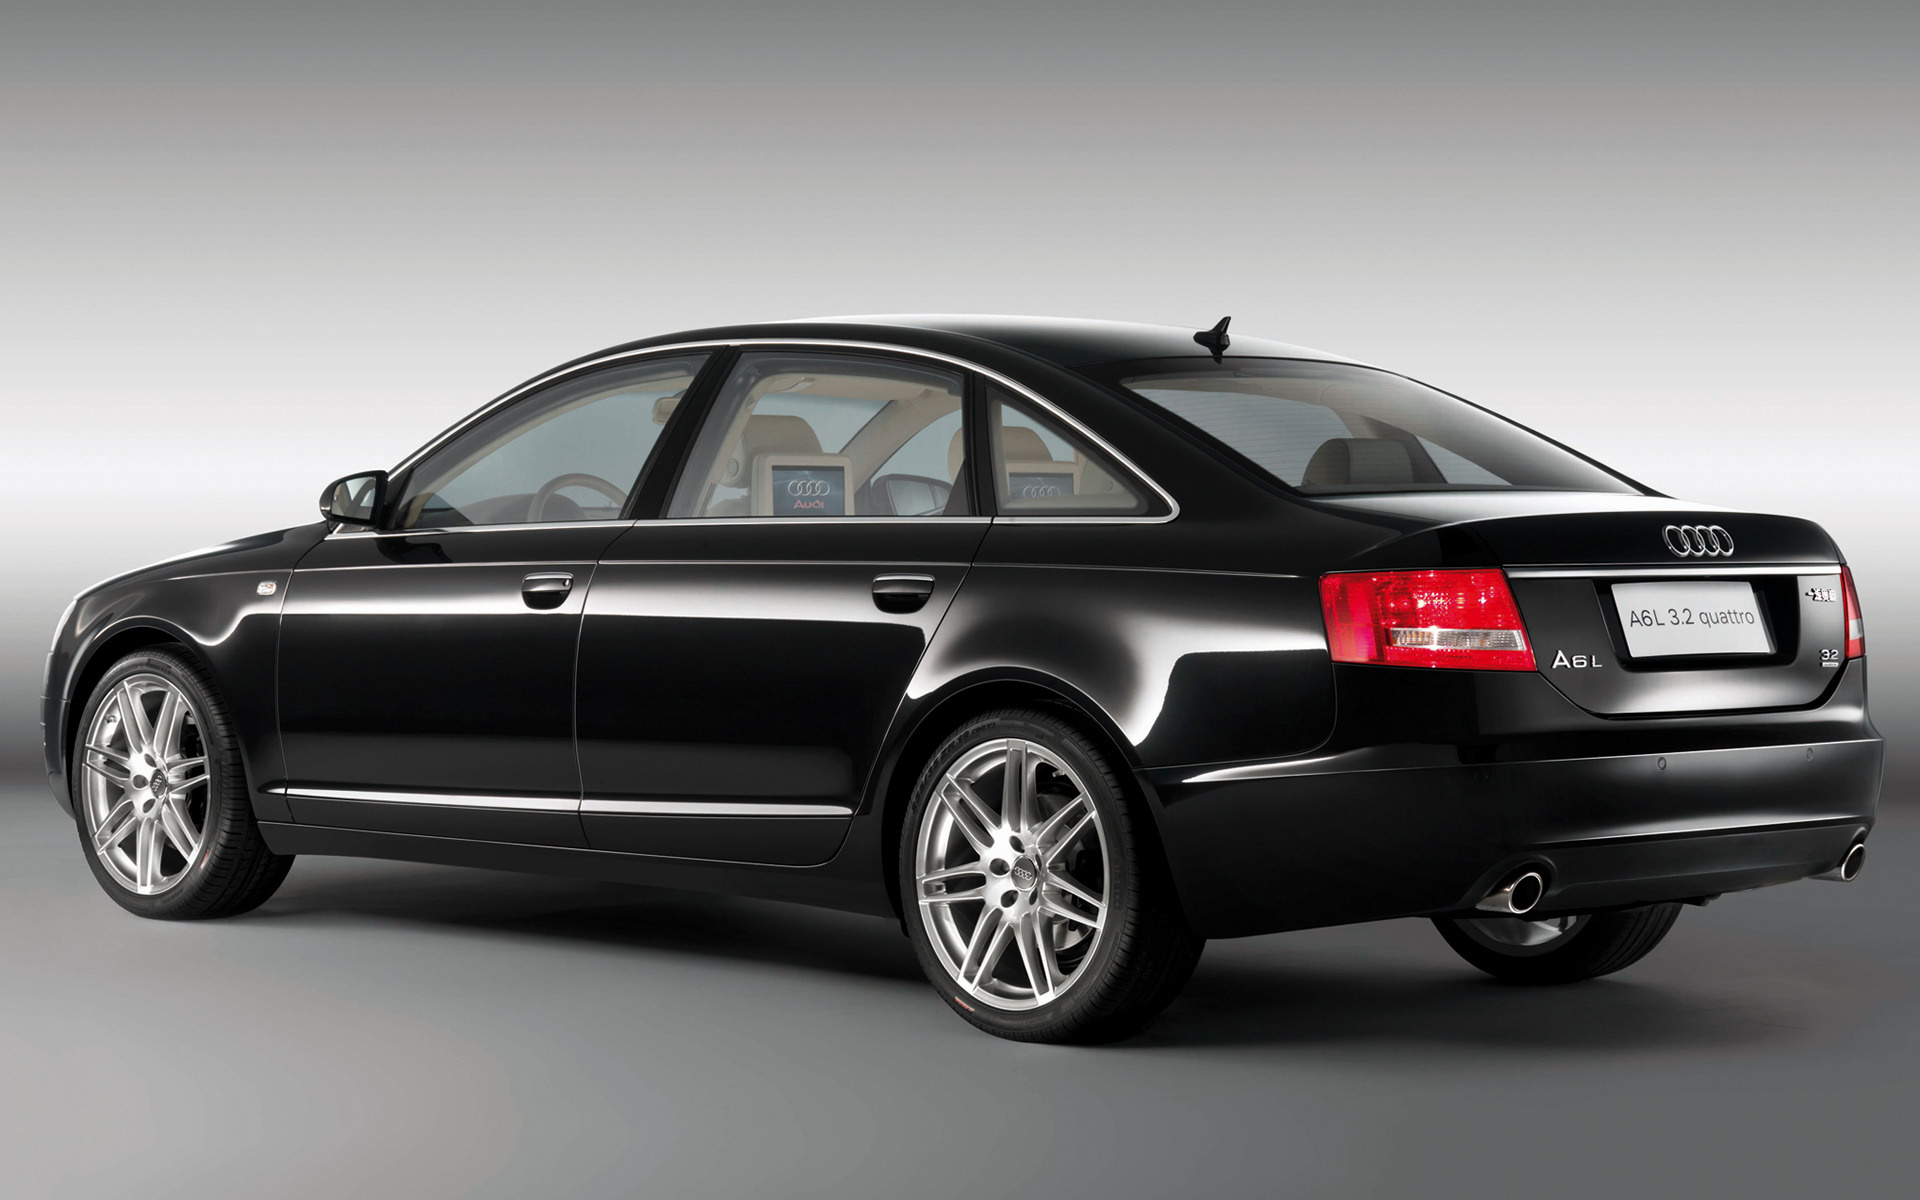 West Oven Verfijning 2005 Audi A6 L Sedan (CN) - Wallpapers and HD Images | Car Pixel